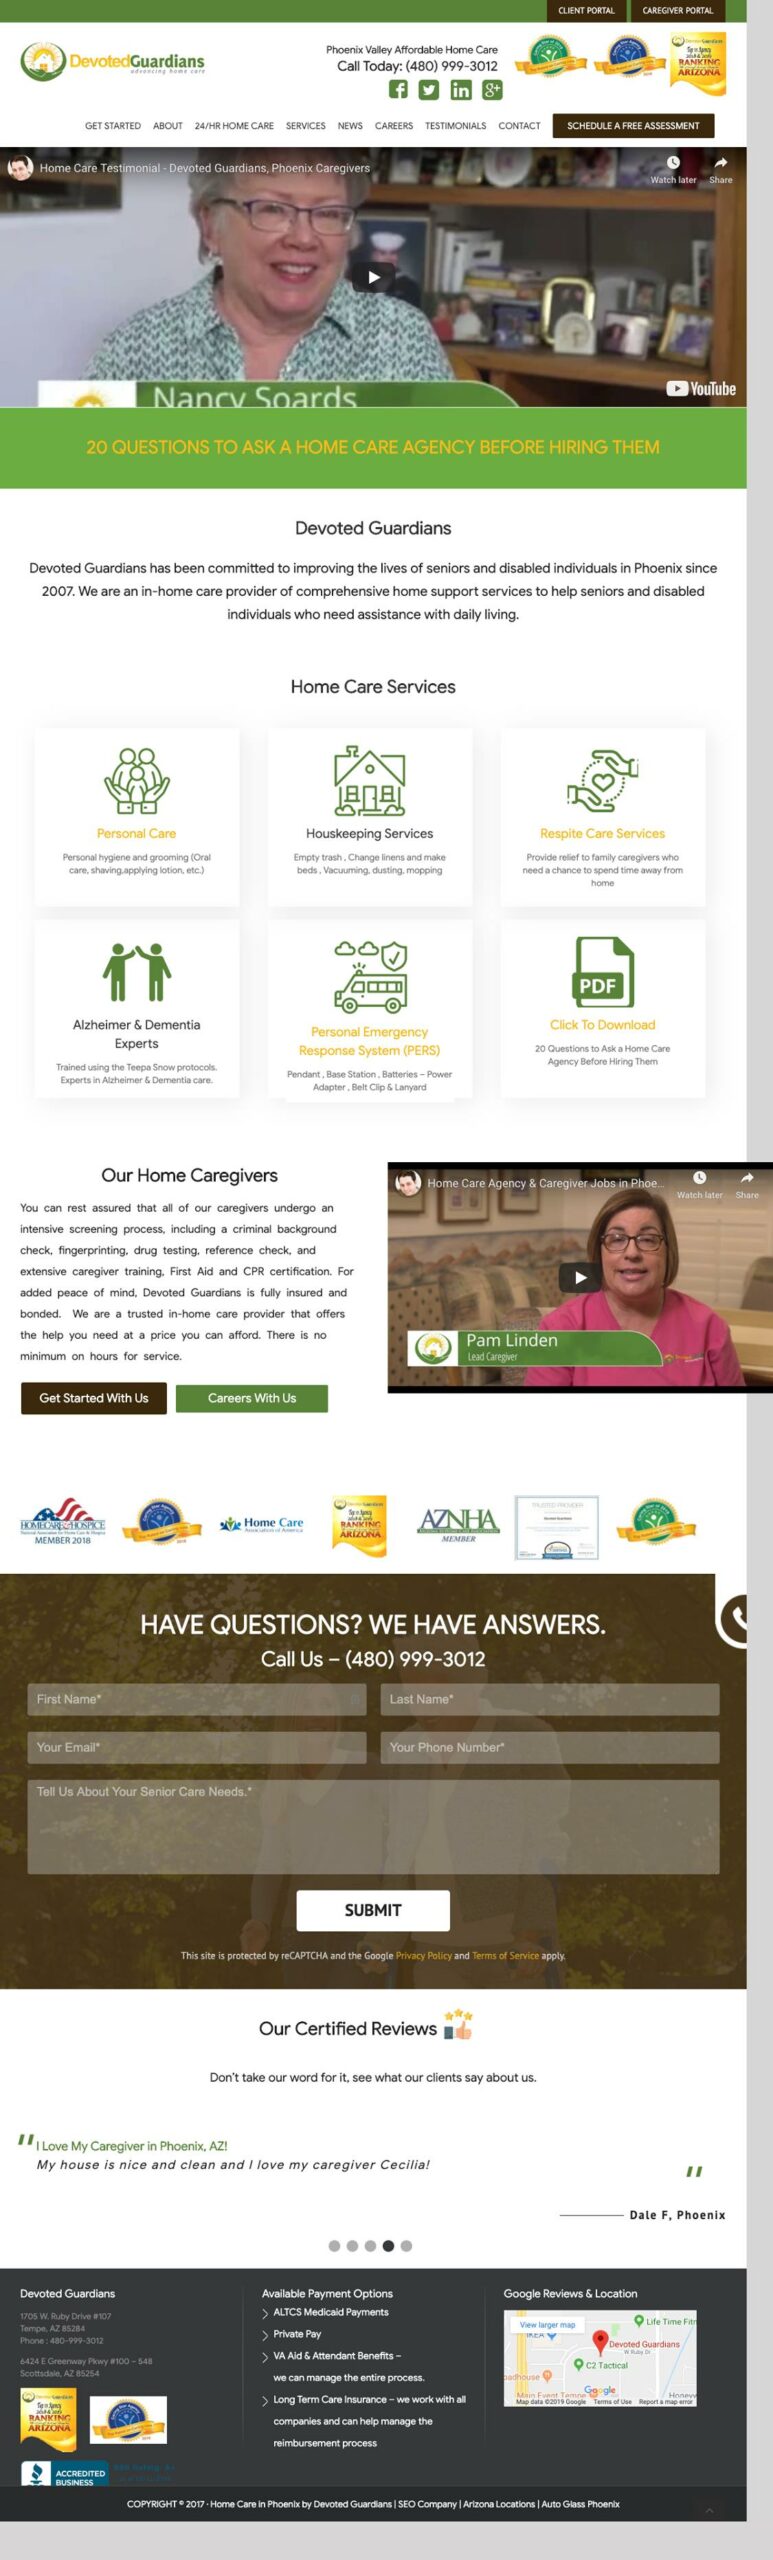 Web Design For A Home Care Agency